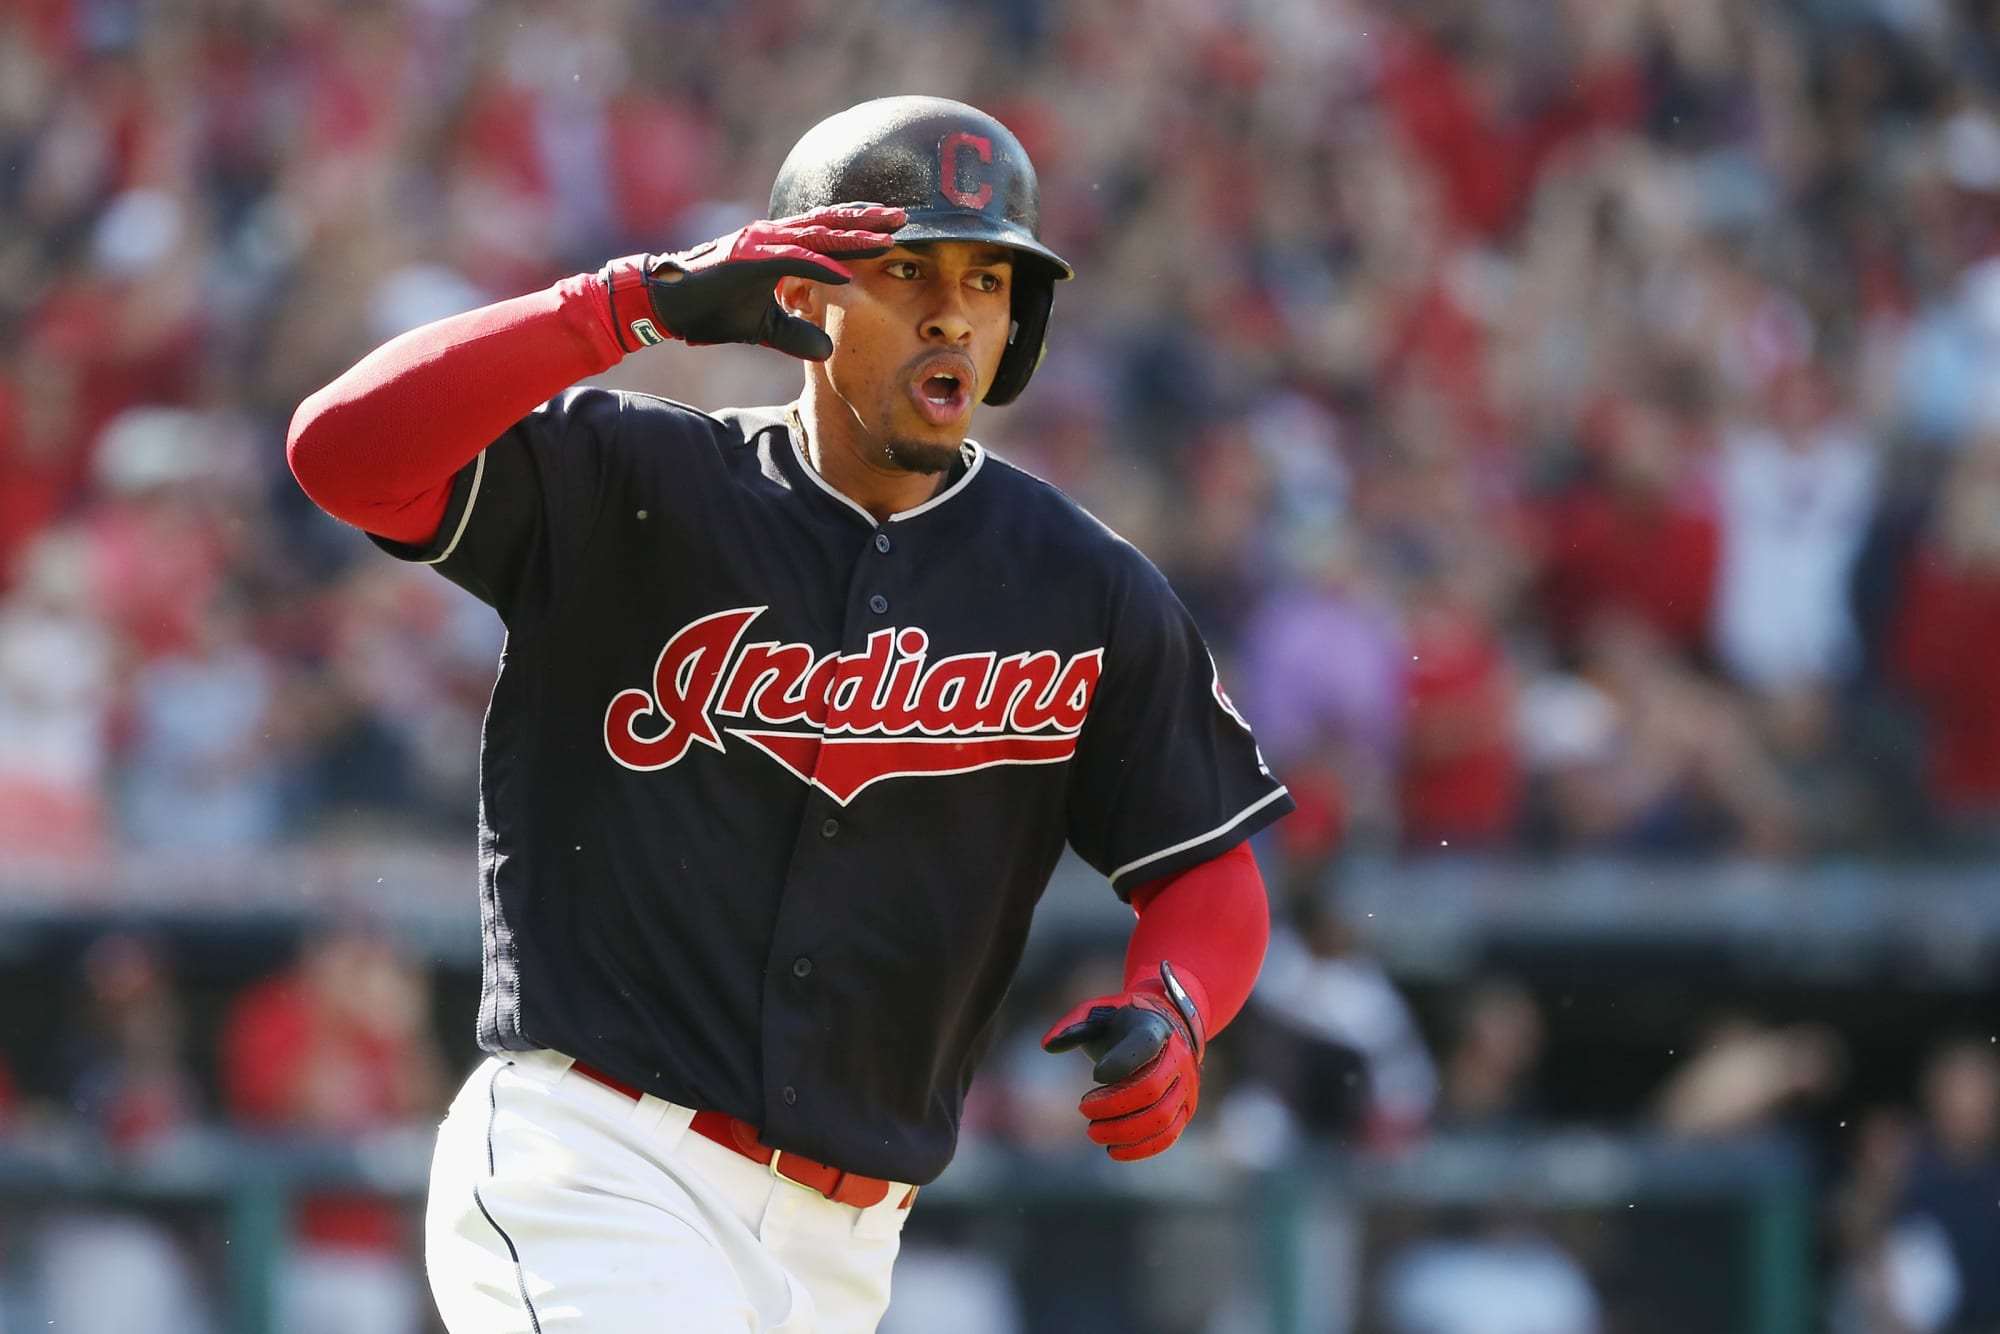 Cleveland Indians: Team preview and prediction for 2020 season